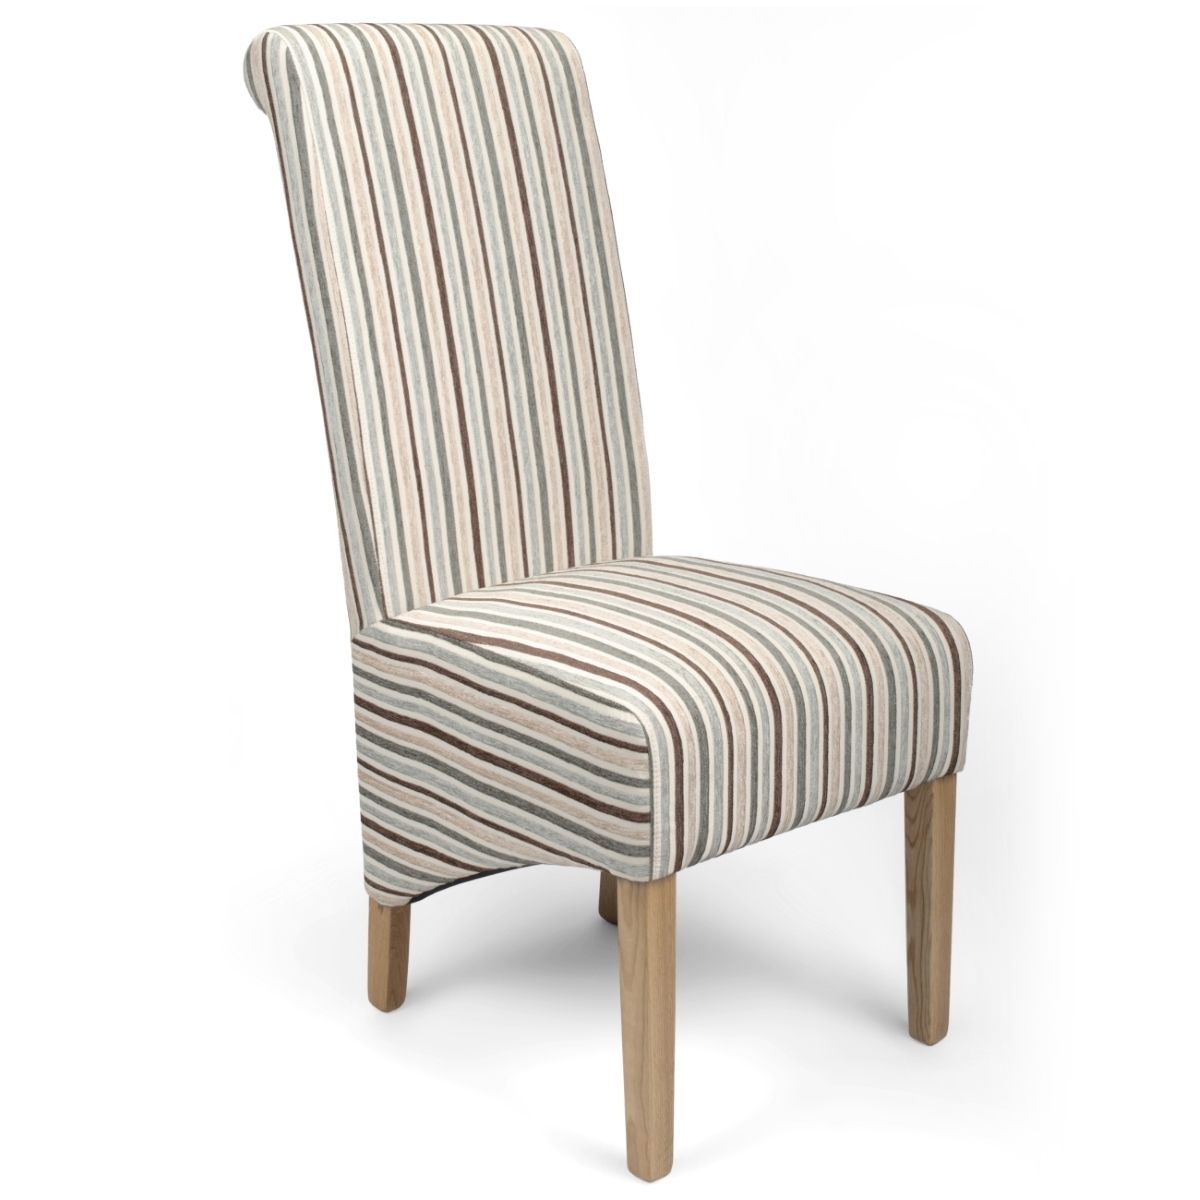 2018 Dining Chairs – Krista Stripe Dining Chairs In Duck Egg Blue Within Blue Stripe Dining Chairs (View 4 of 20)